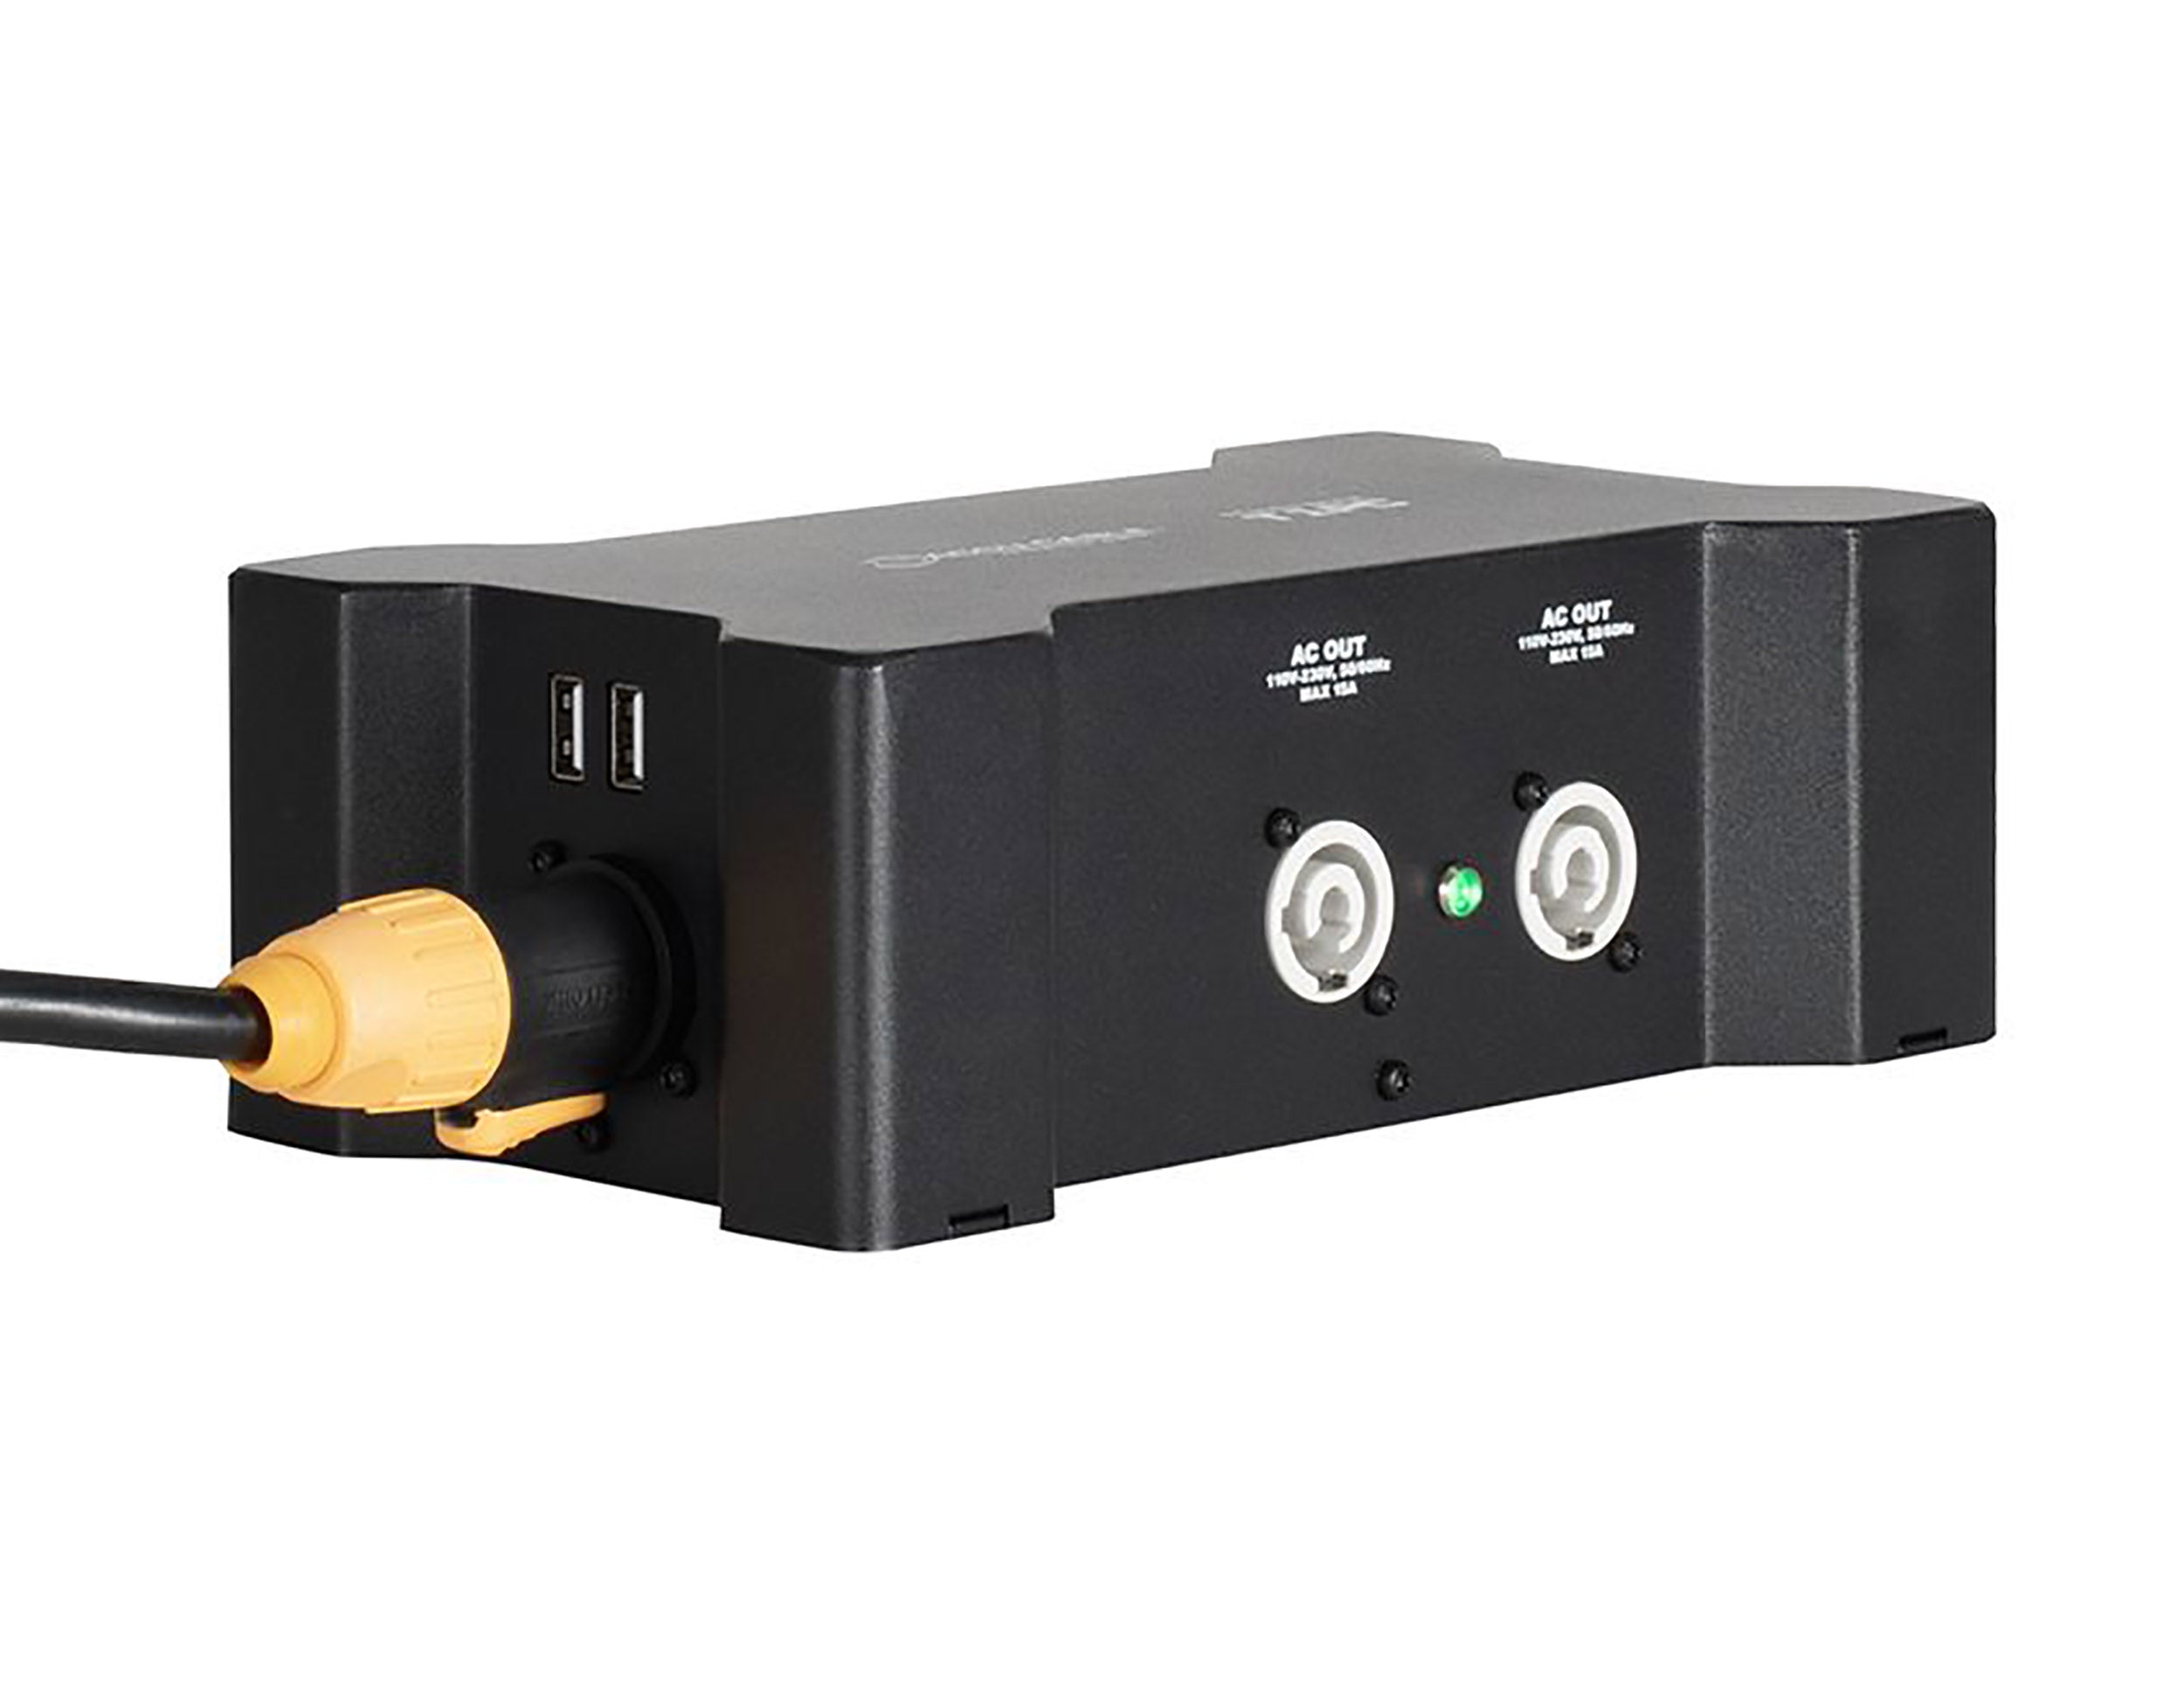 Accu-Cable Power Bone T1PC, Power Distribution Box by Accu Cable